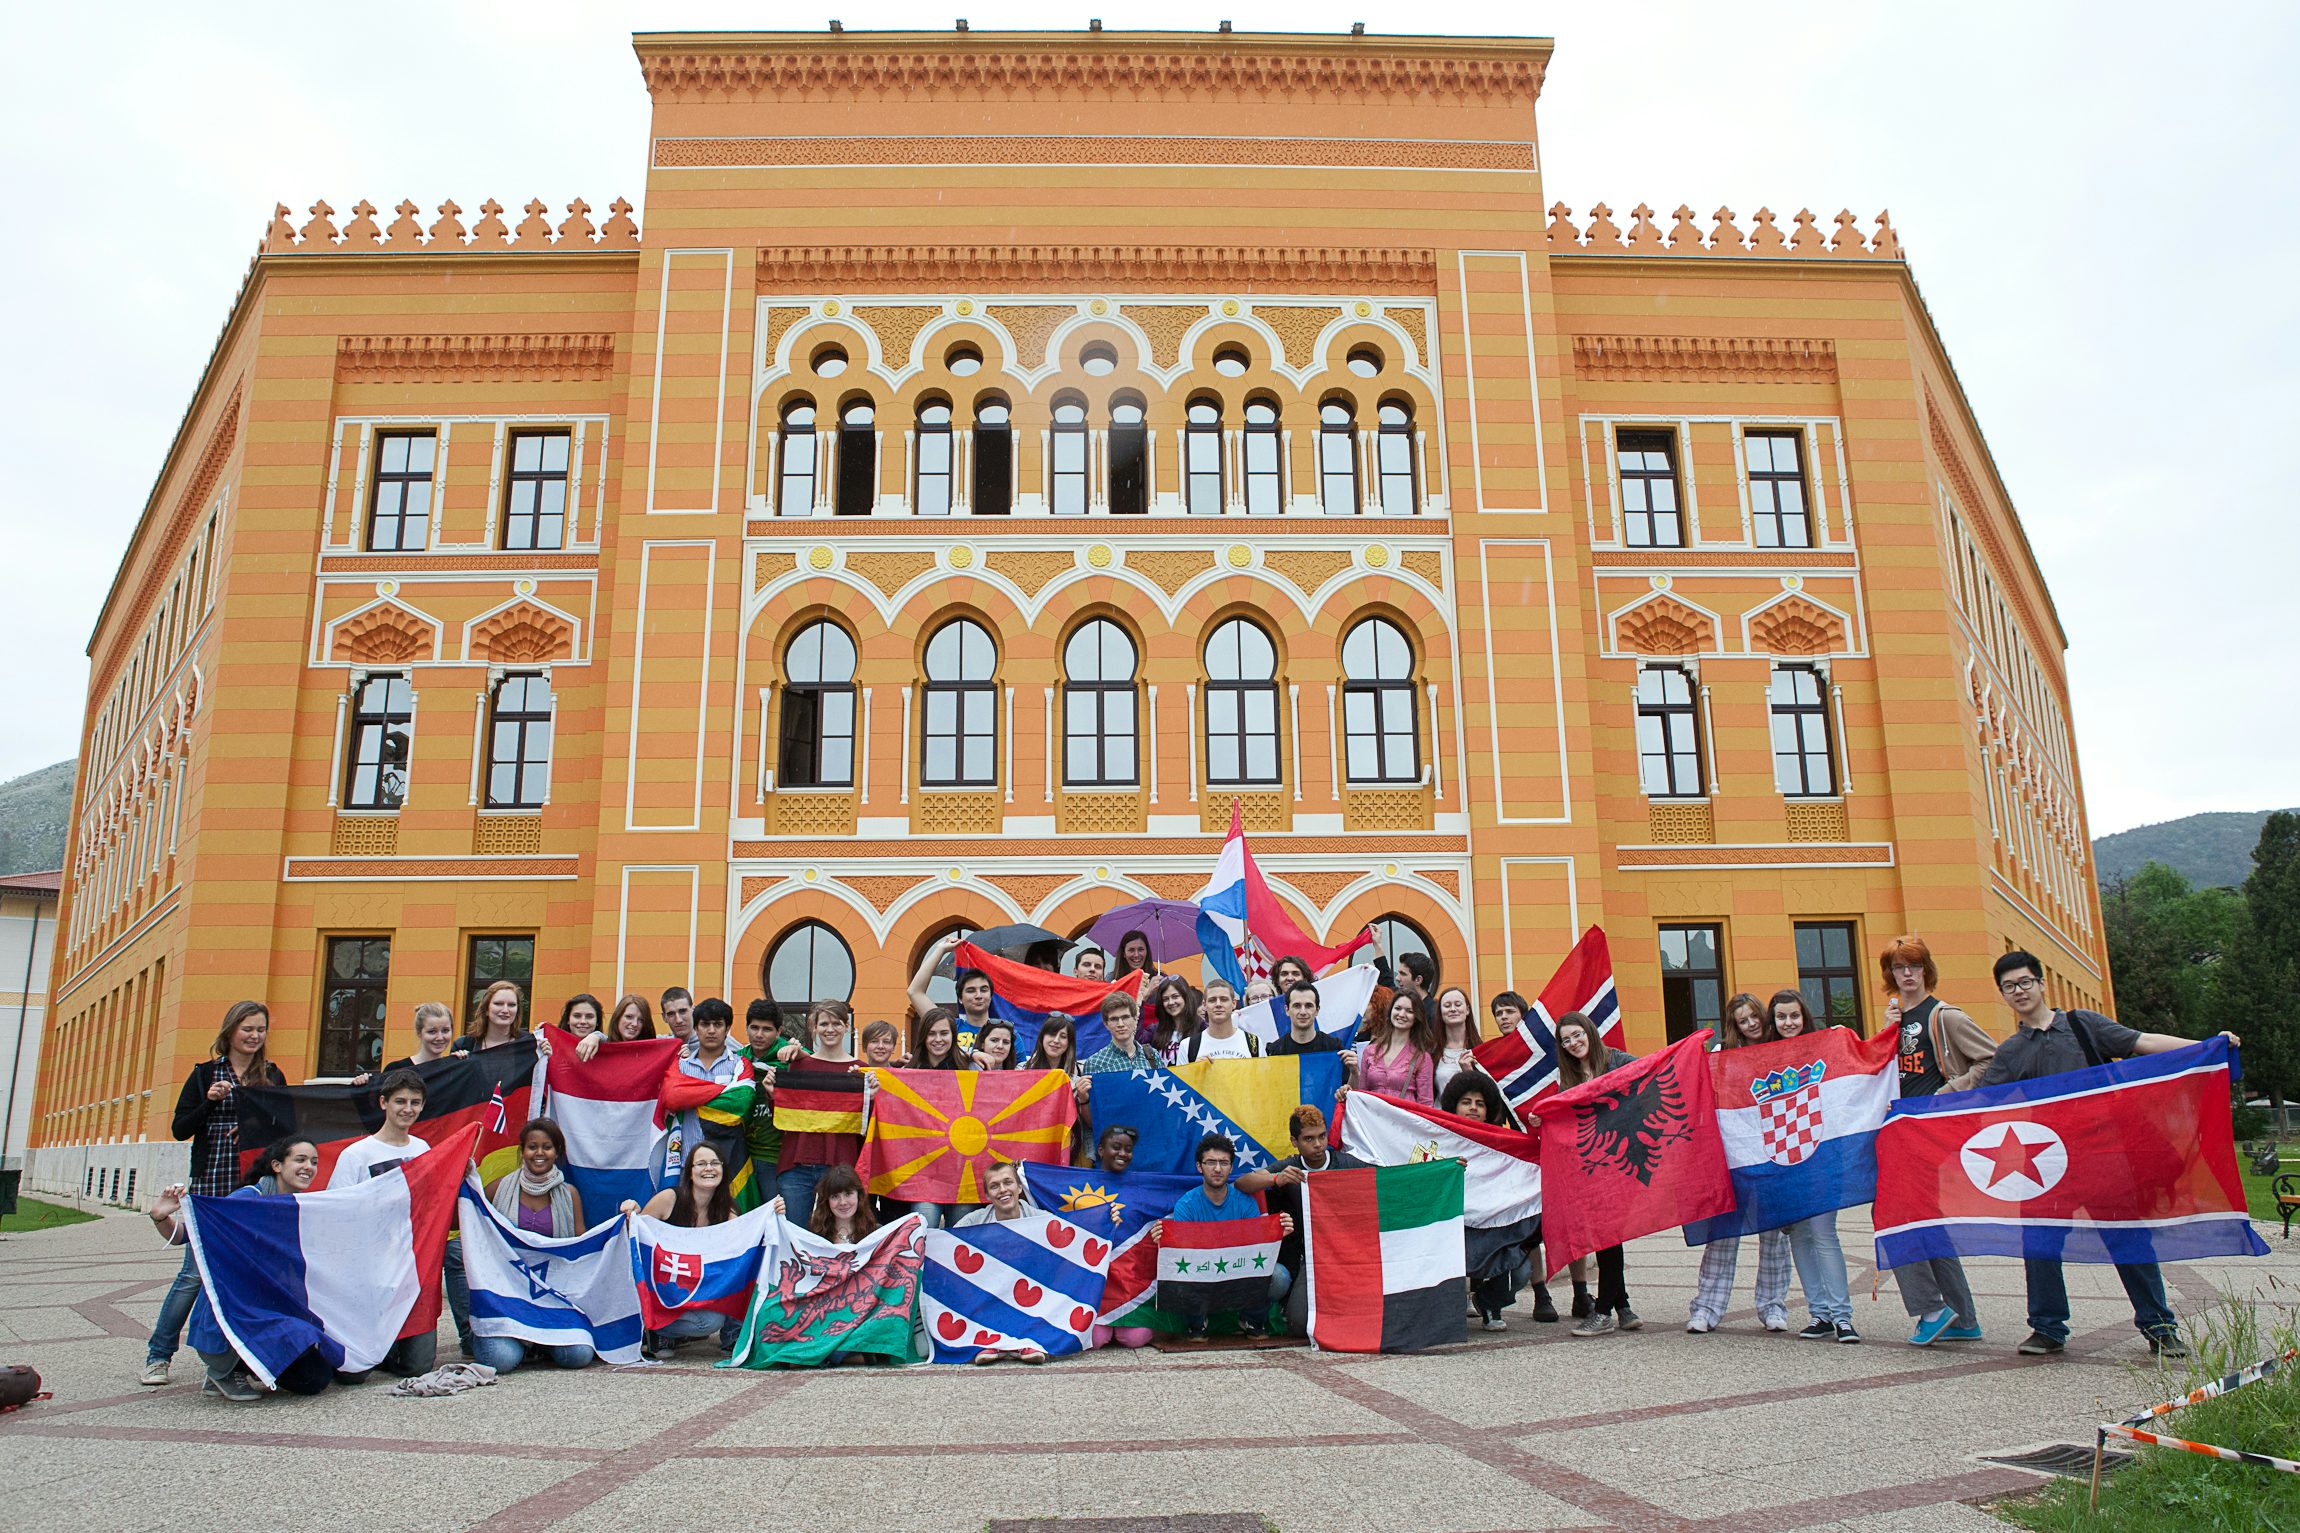 A group of students with flags is posing in front of the UWC school building in Mostar